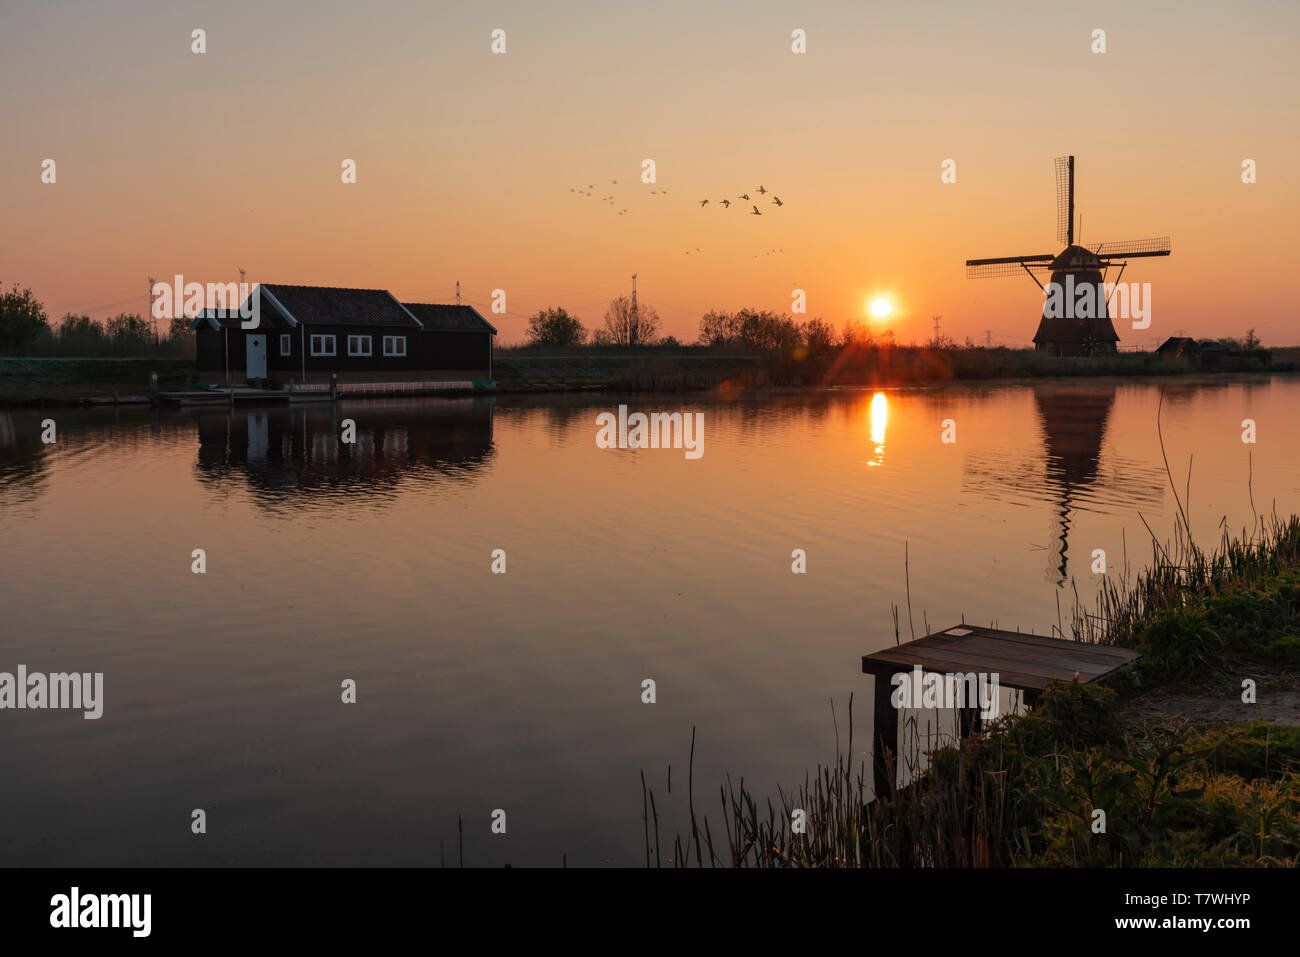 Loading platform at the edge with the calm water in the long canal during facing a windmill reflection in the burning sunrise color morning Stock Photo